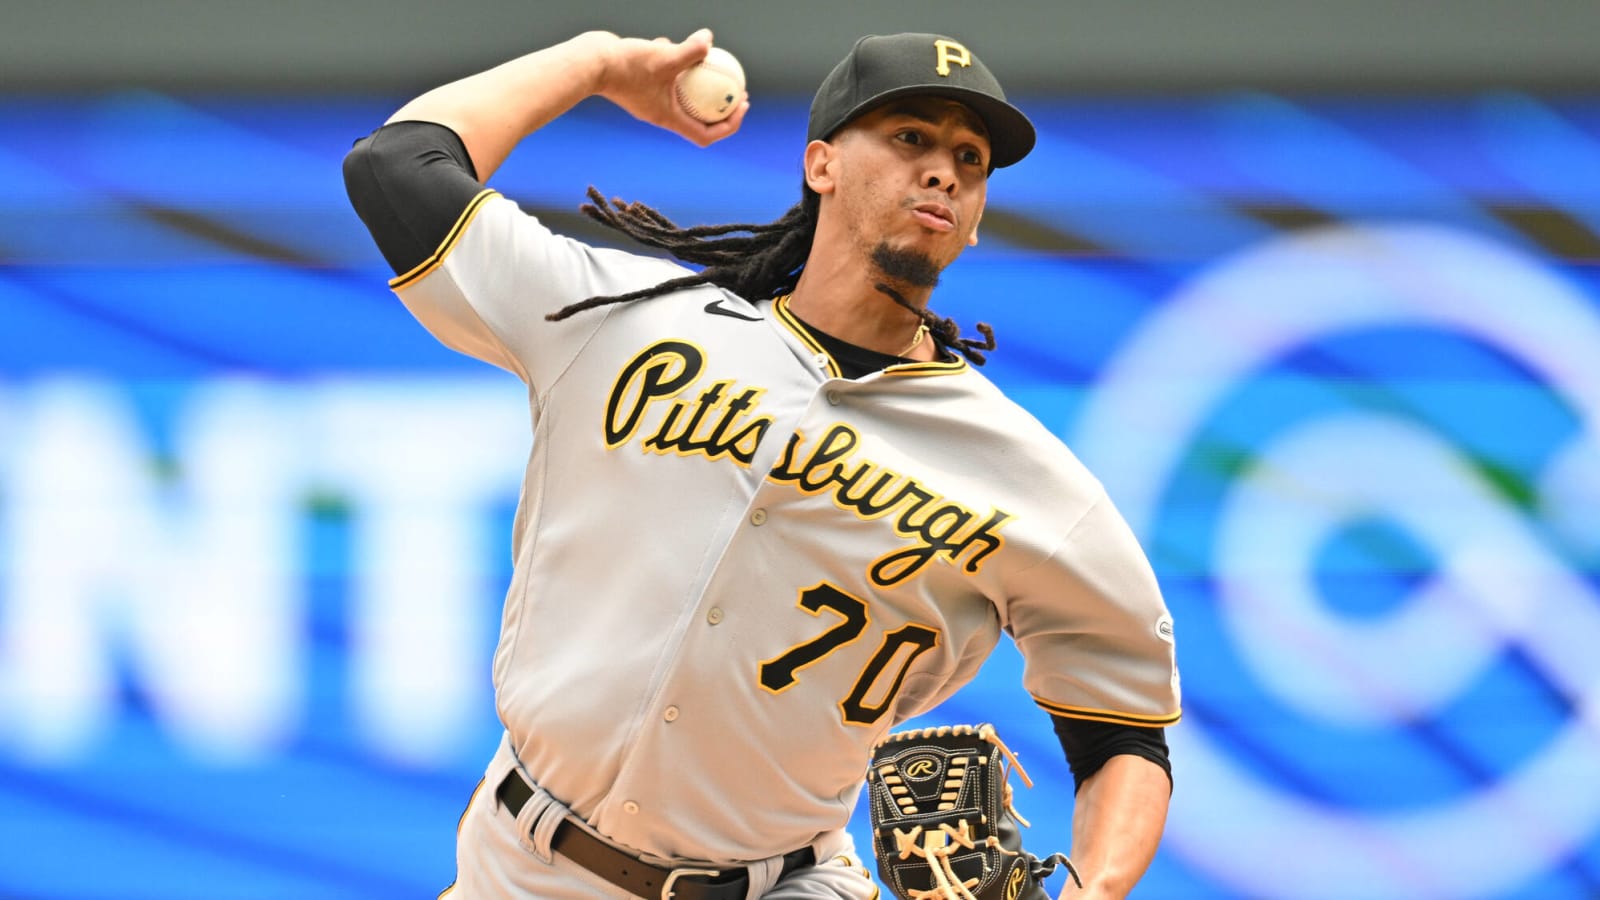 Wild Bido pulled early, sinks Pirates on Hall of Fame night